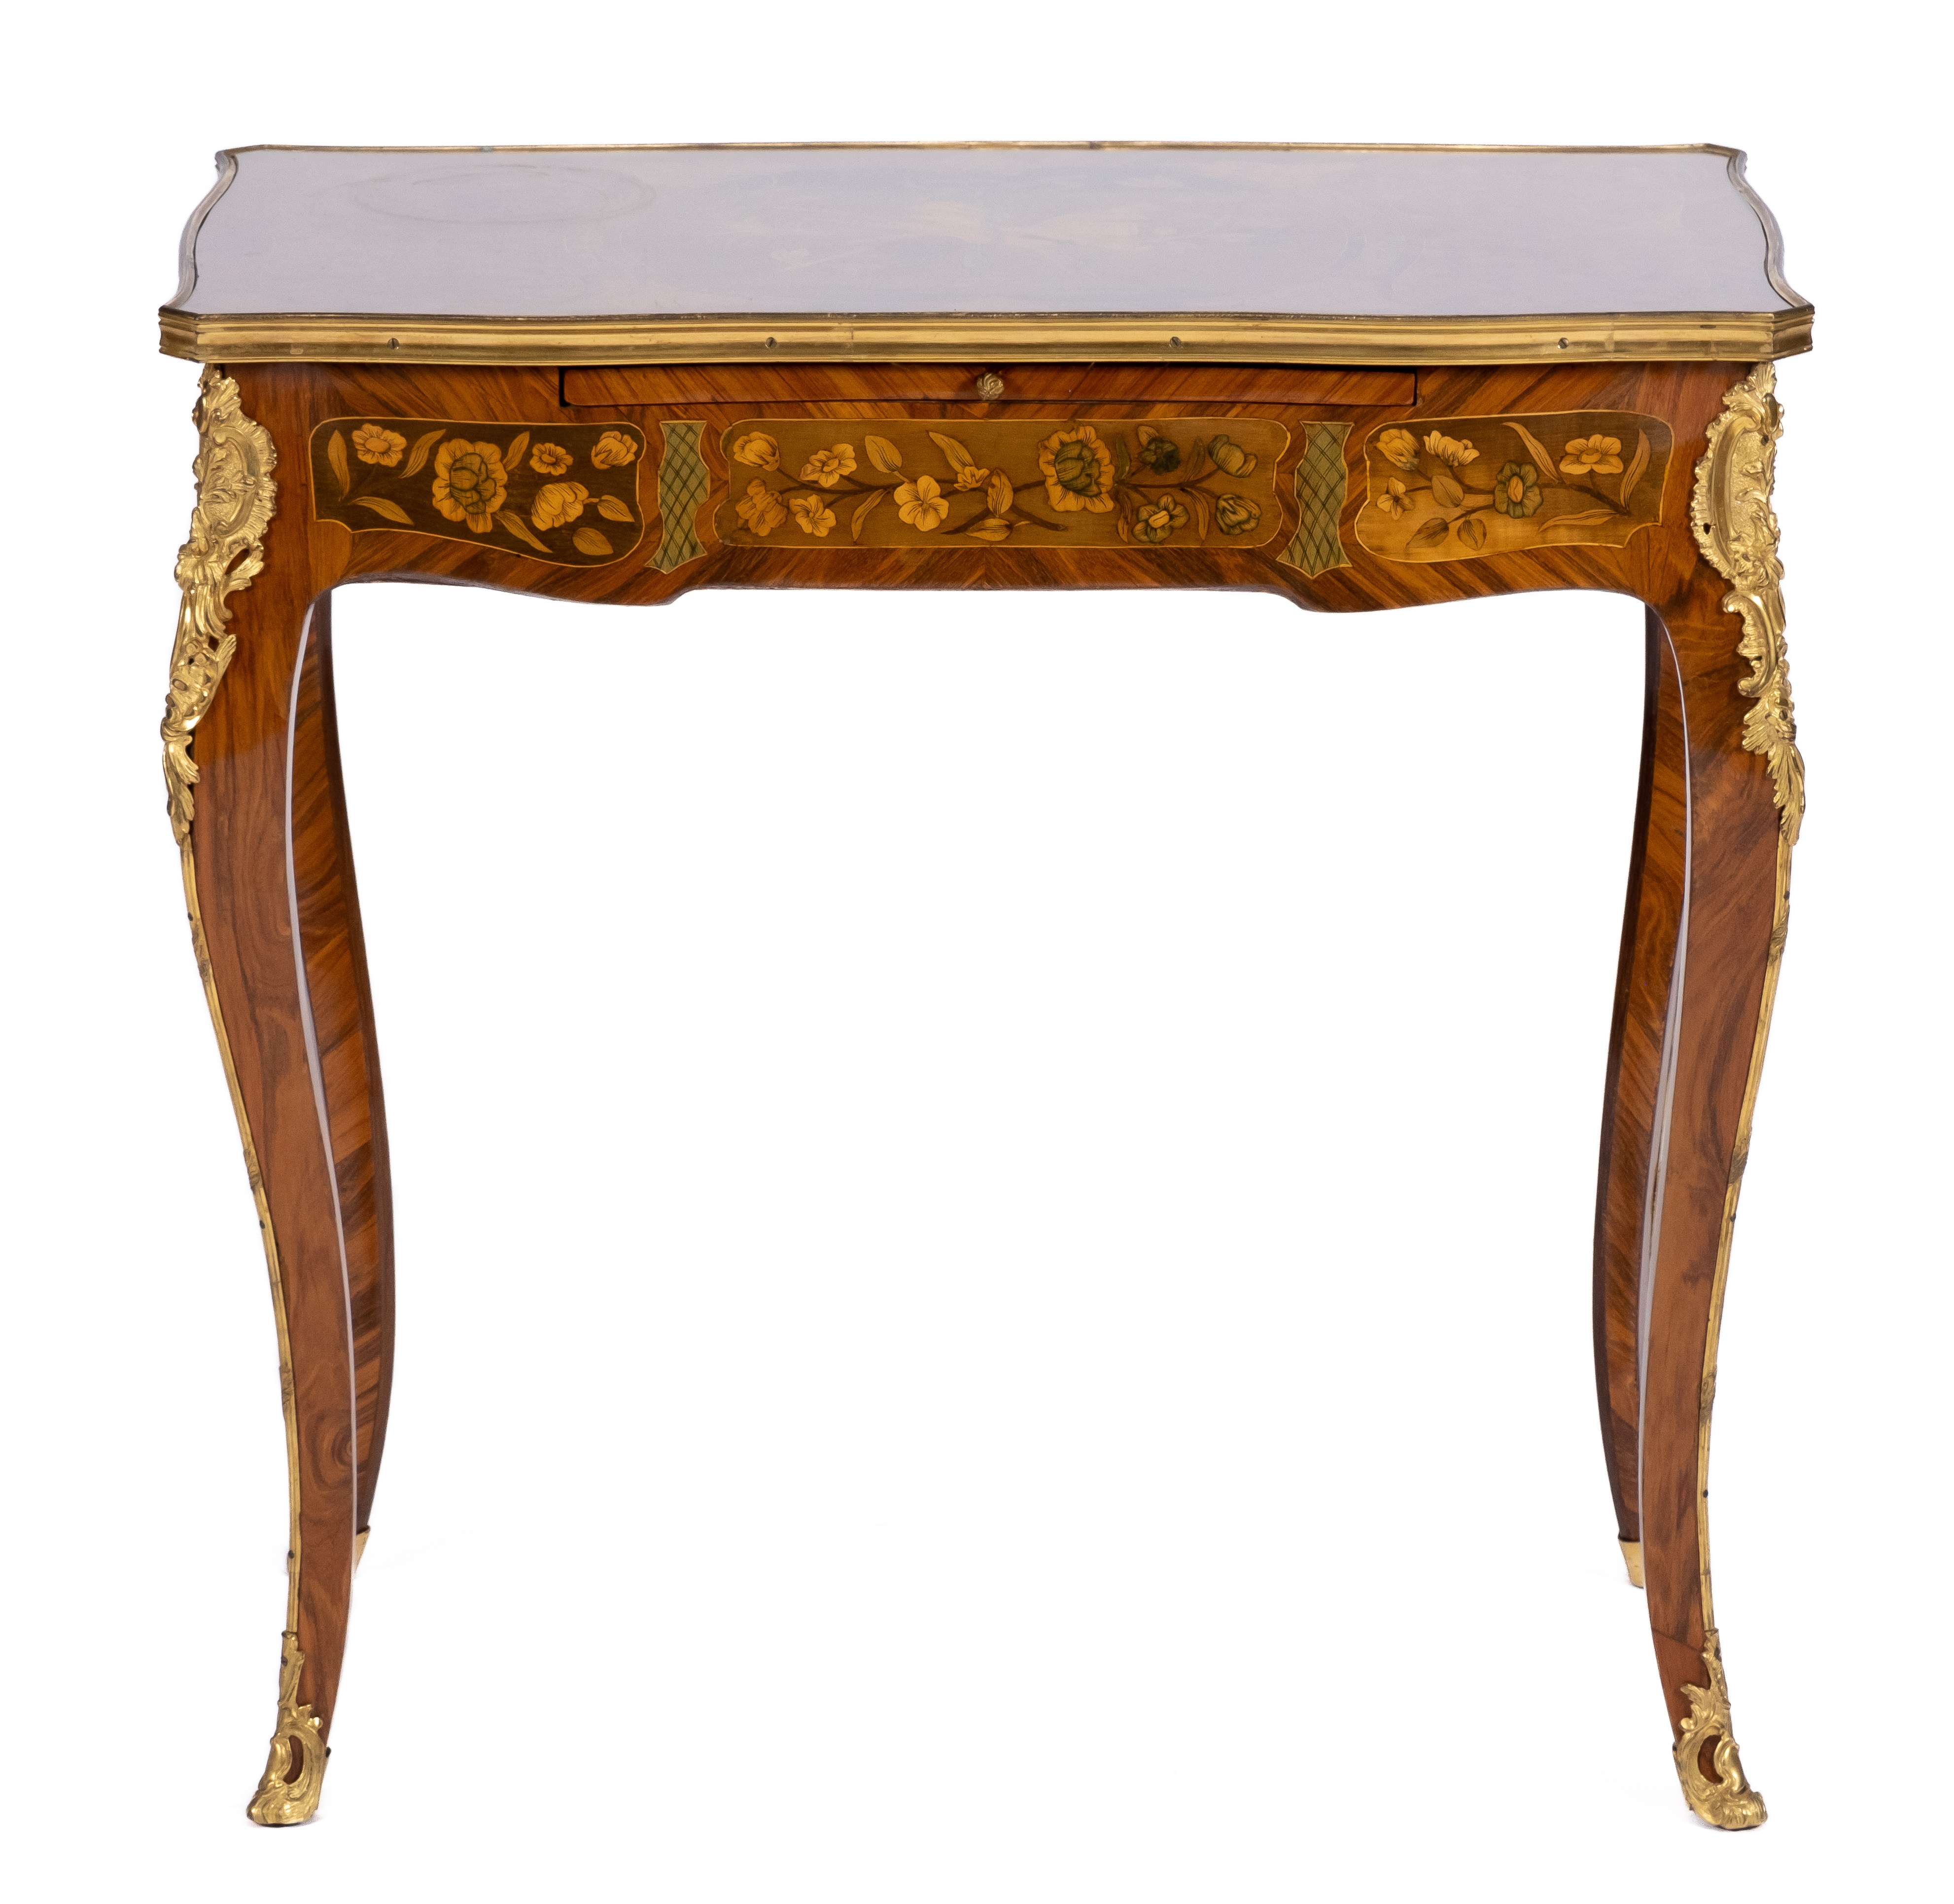 A Louis XV ormolu-mounted kingwood, sycamore and fruitwood marquetry table de salon - Image 2 of 4